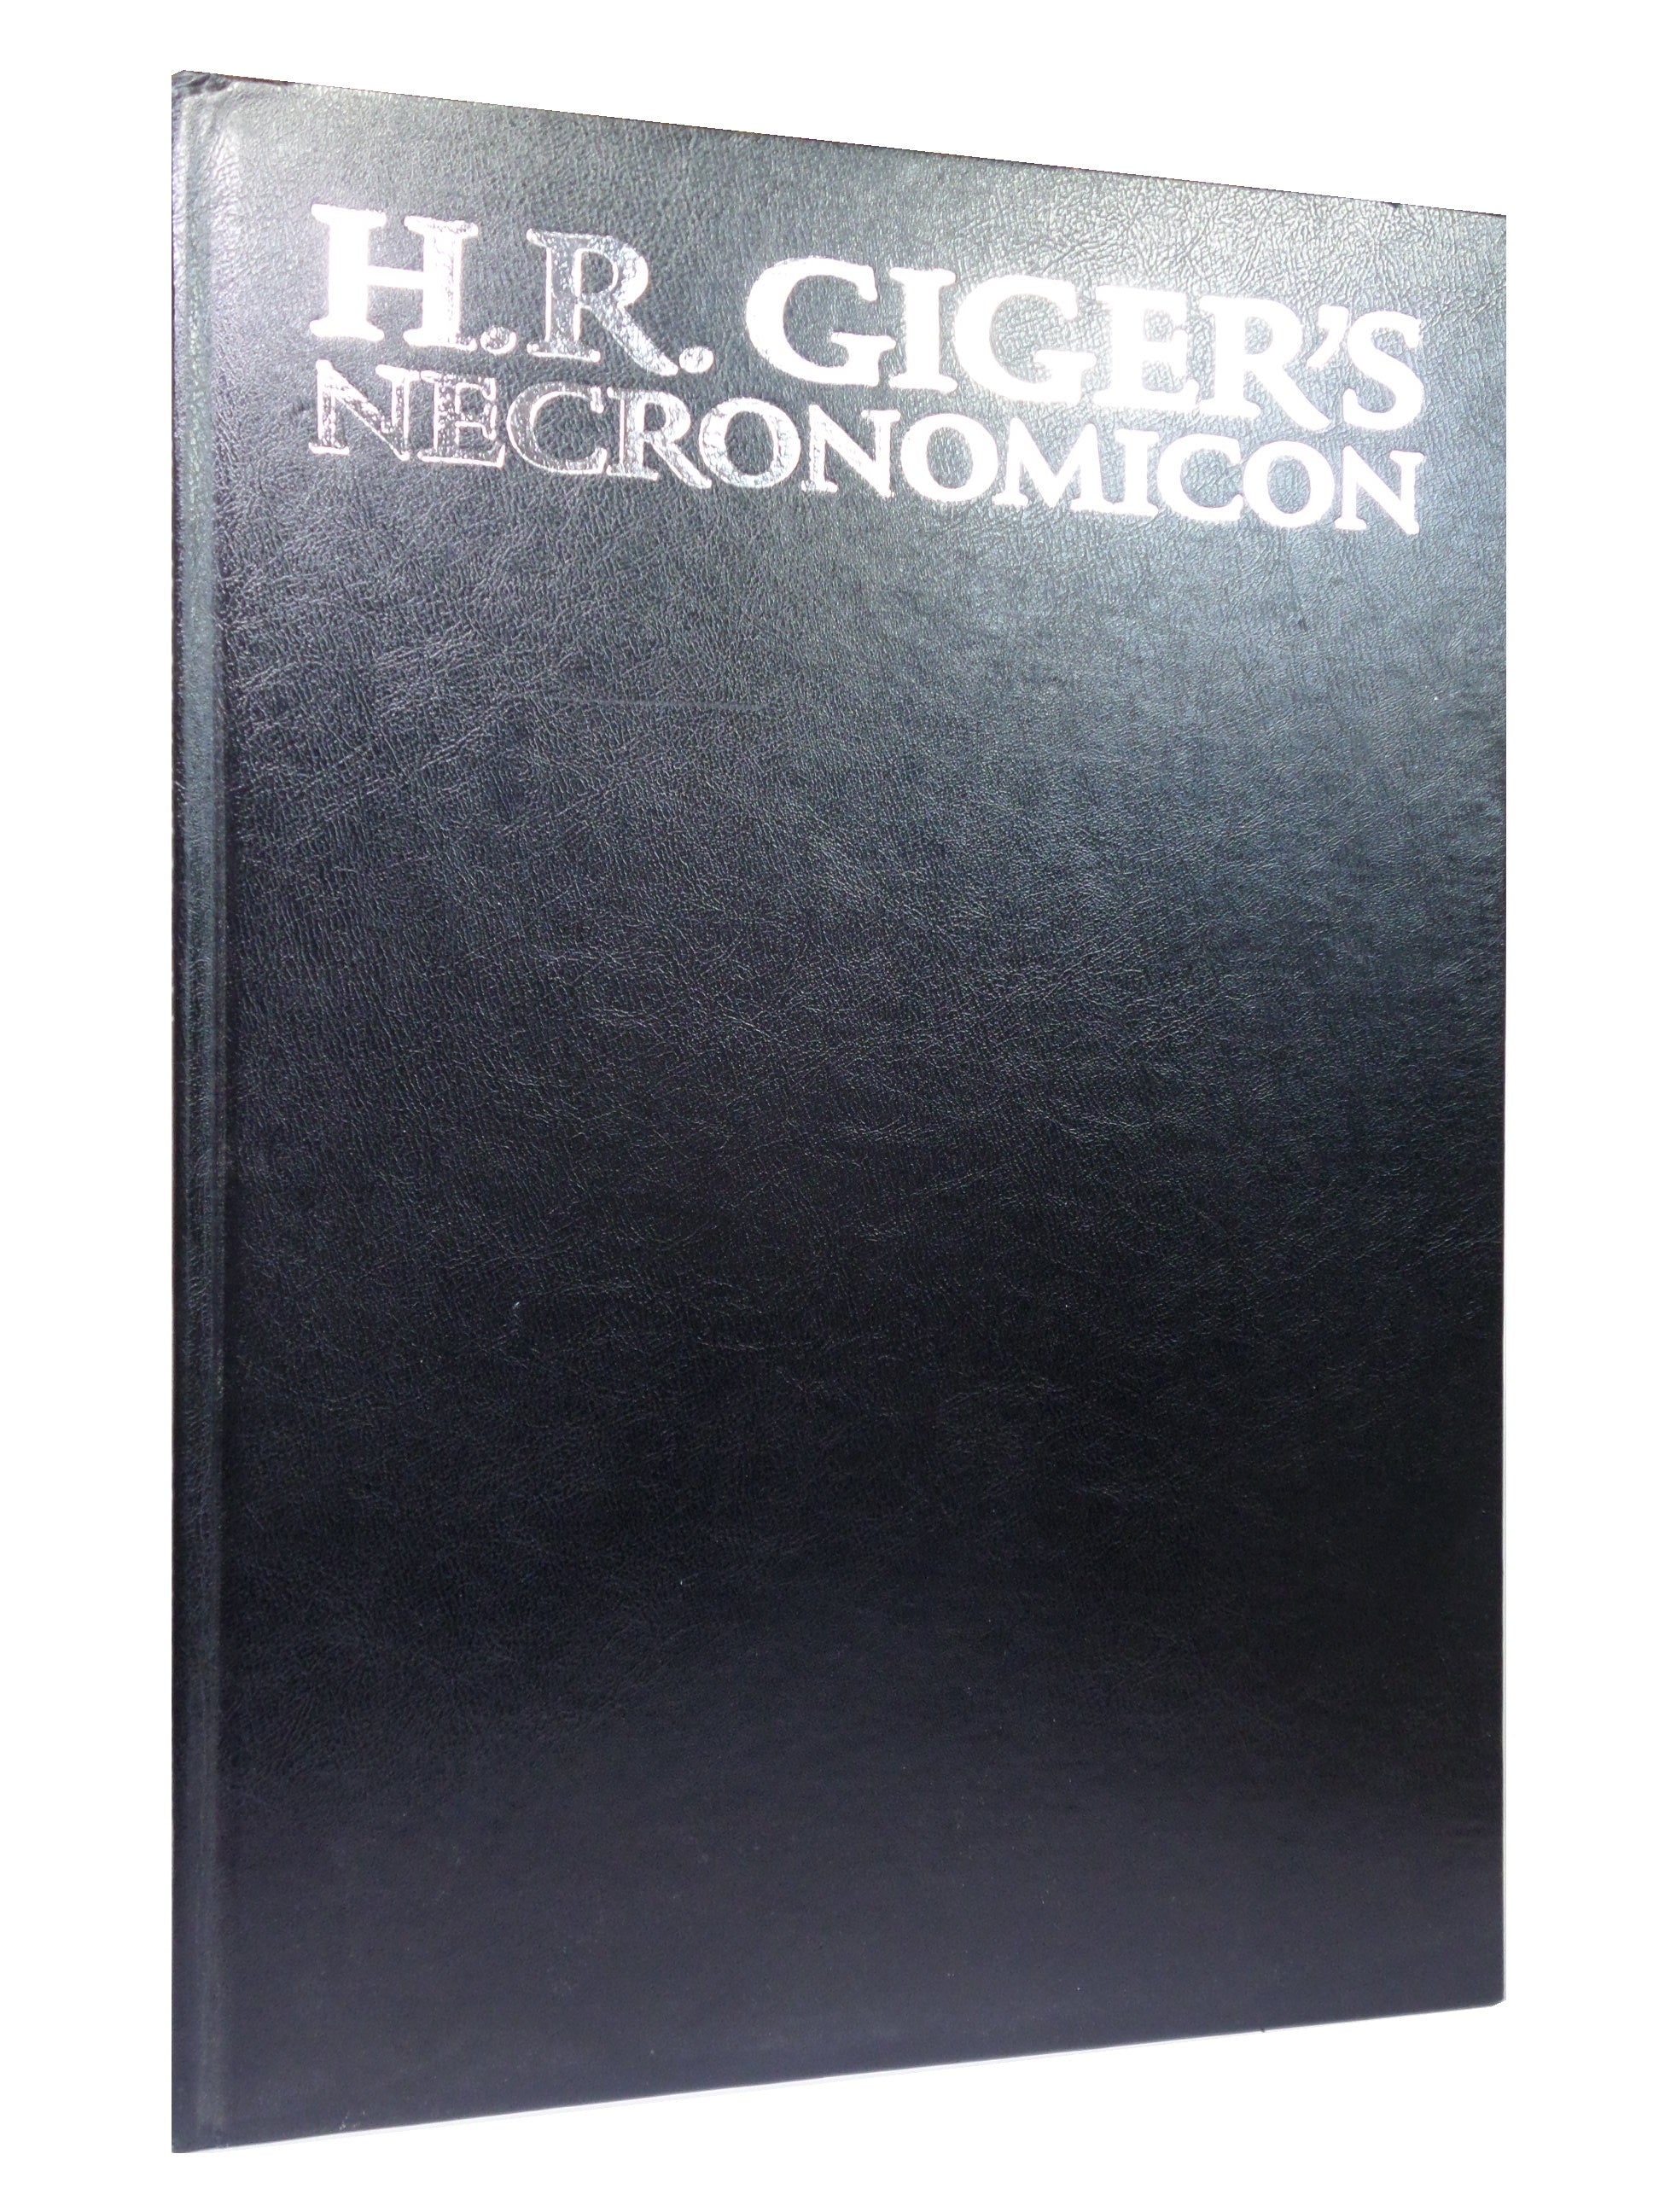 H.R. GIGER'S NECRONOMICON 2003 HARDCOVER WITH DUST JACKET